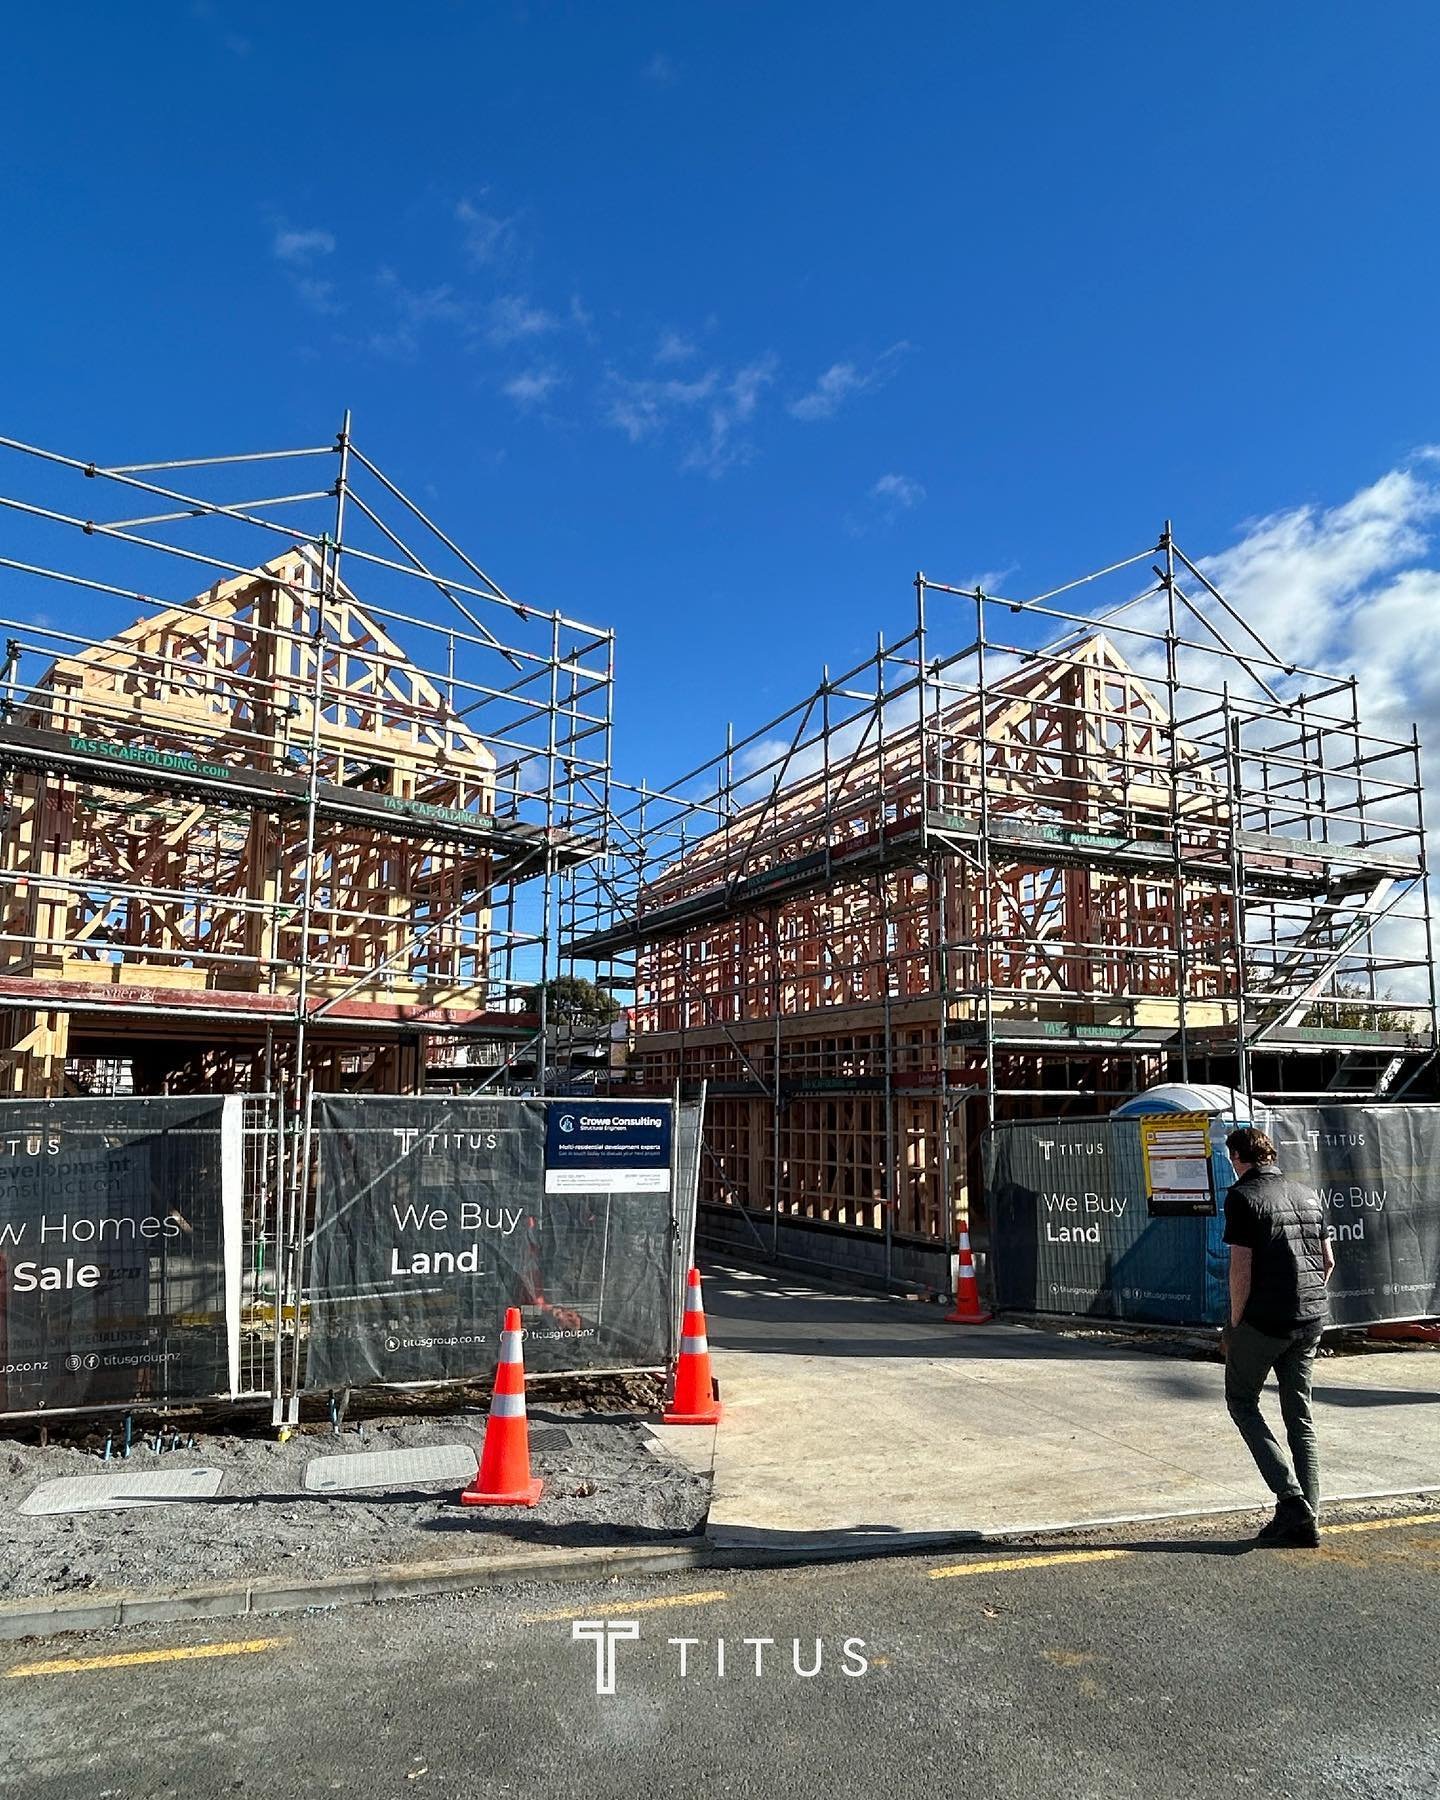 Quick site visit to 39 Pakuranga and progress is soaring! A lot changes in a week! 🗓️🦺🔨